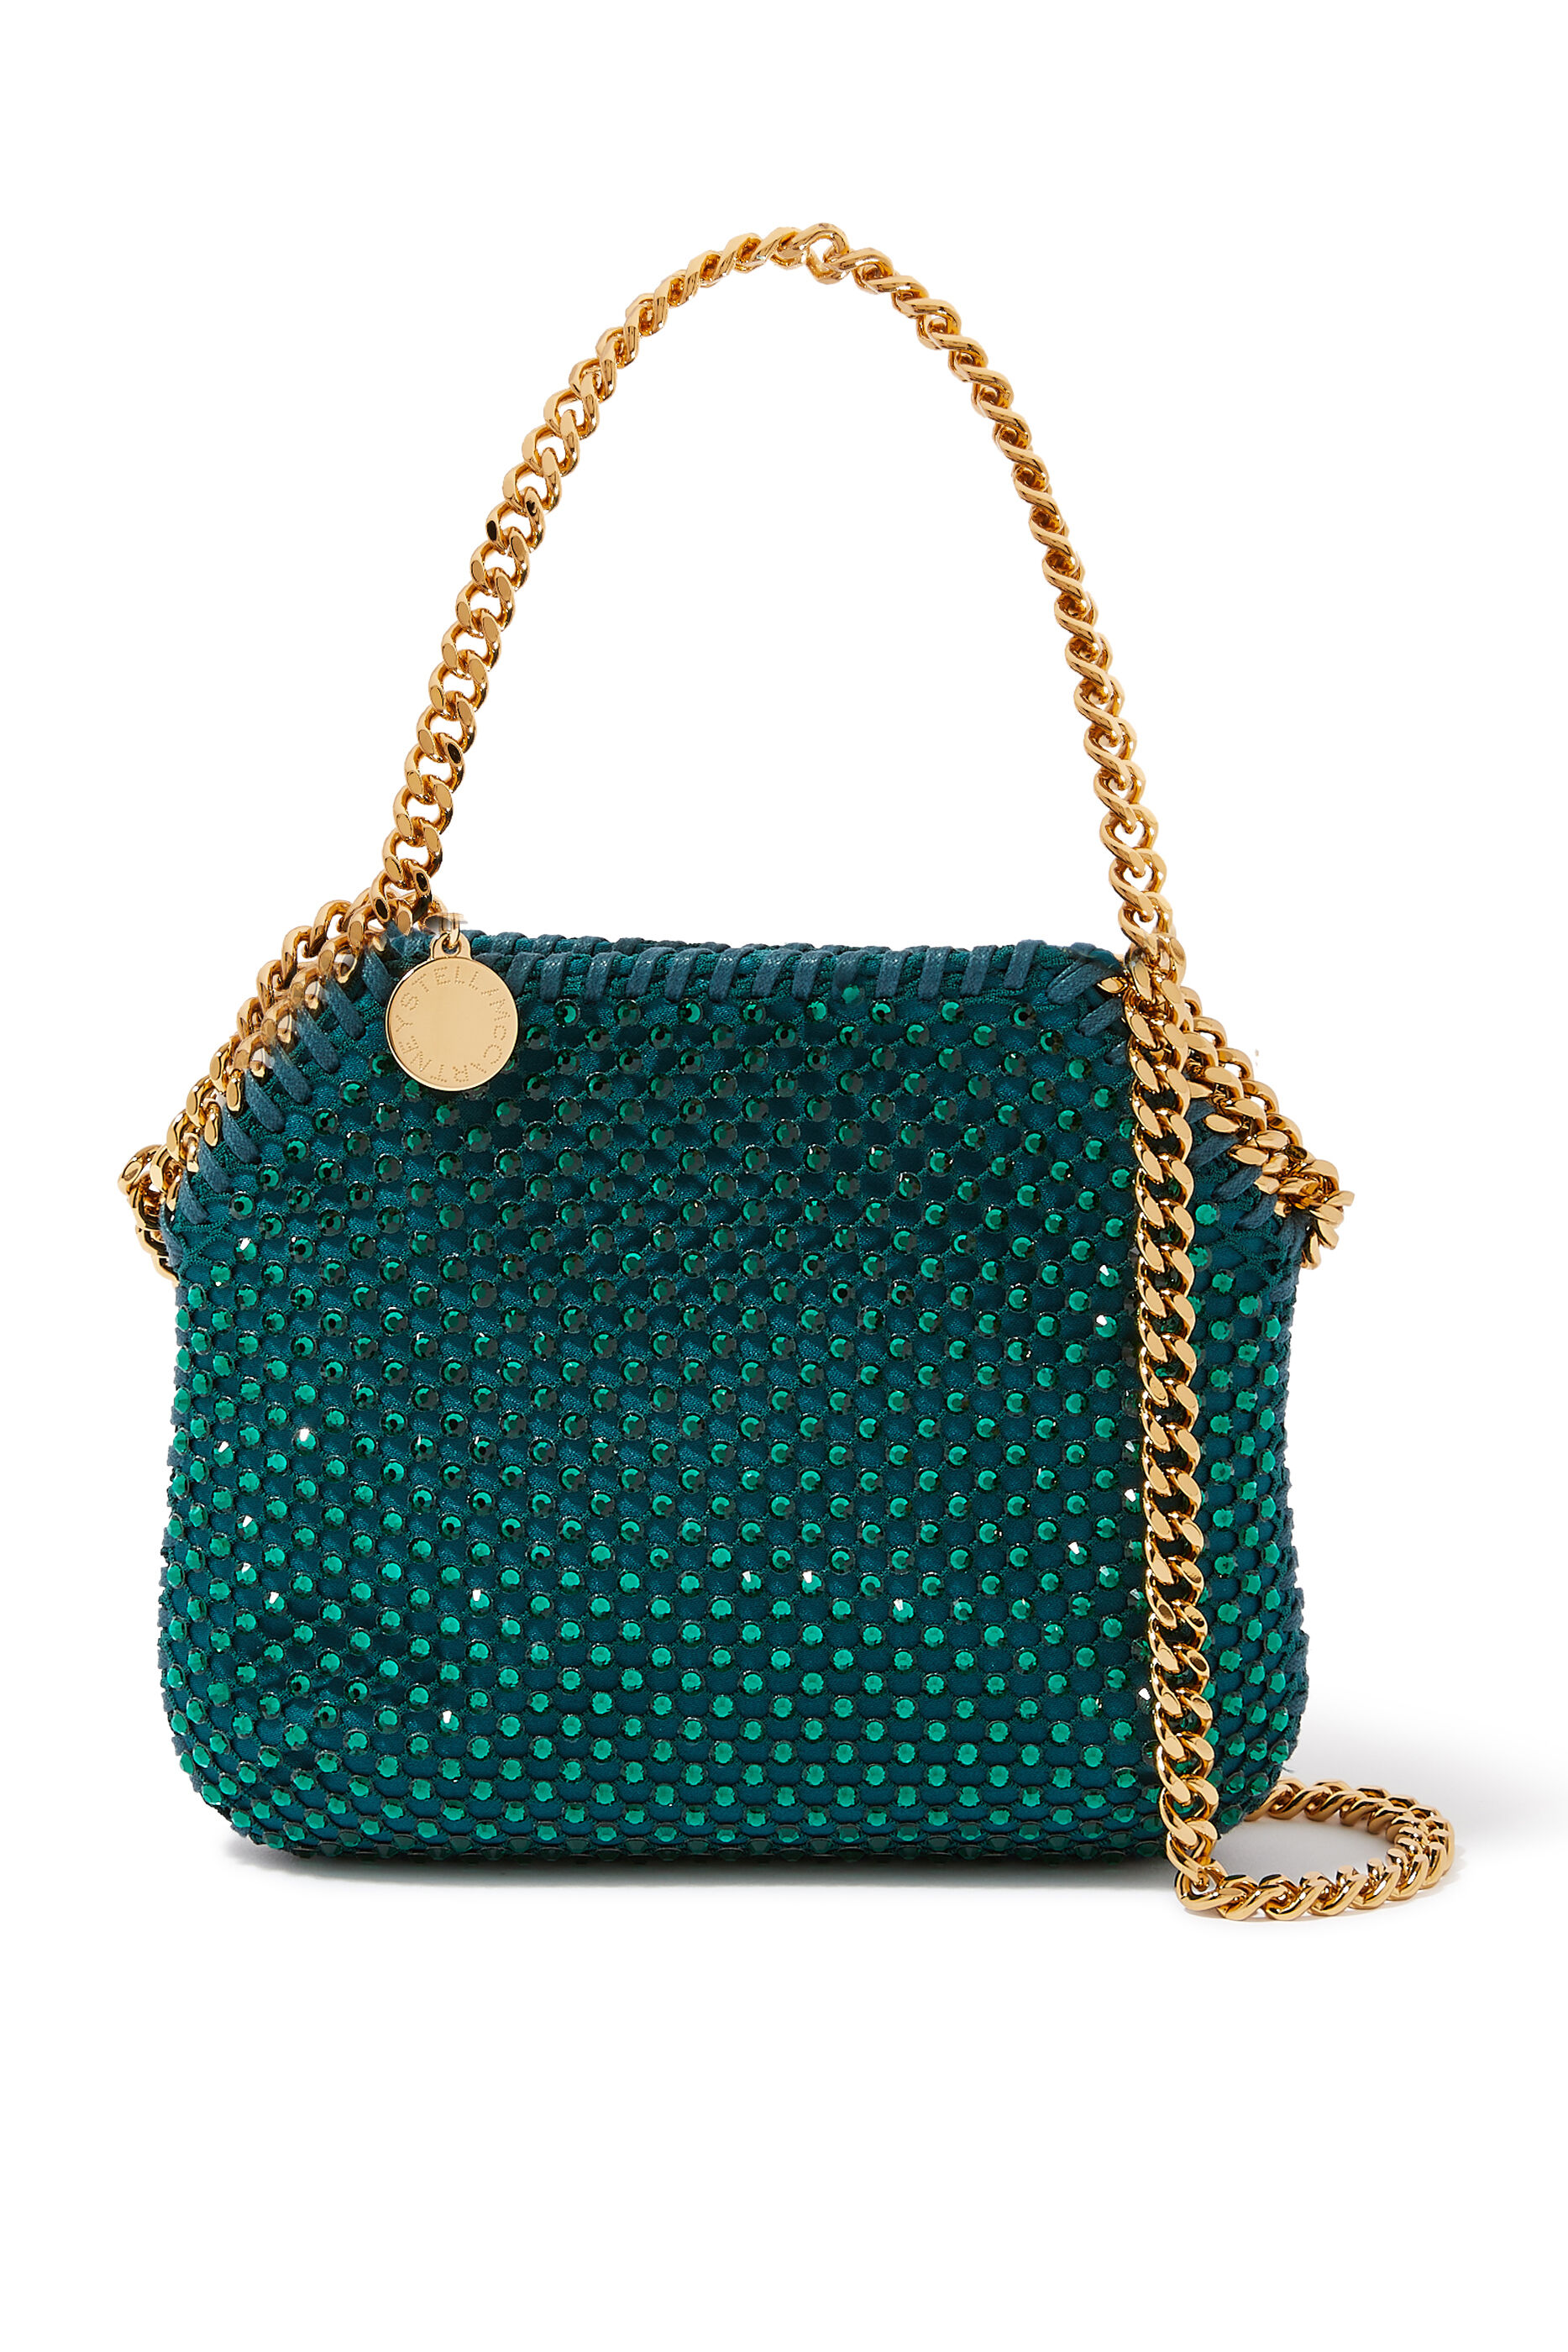 Buy Stella McCartney Middle East Exclusive Falabella Crystal Mesh